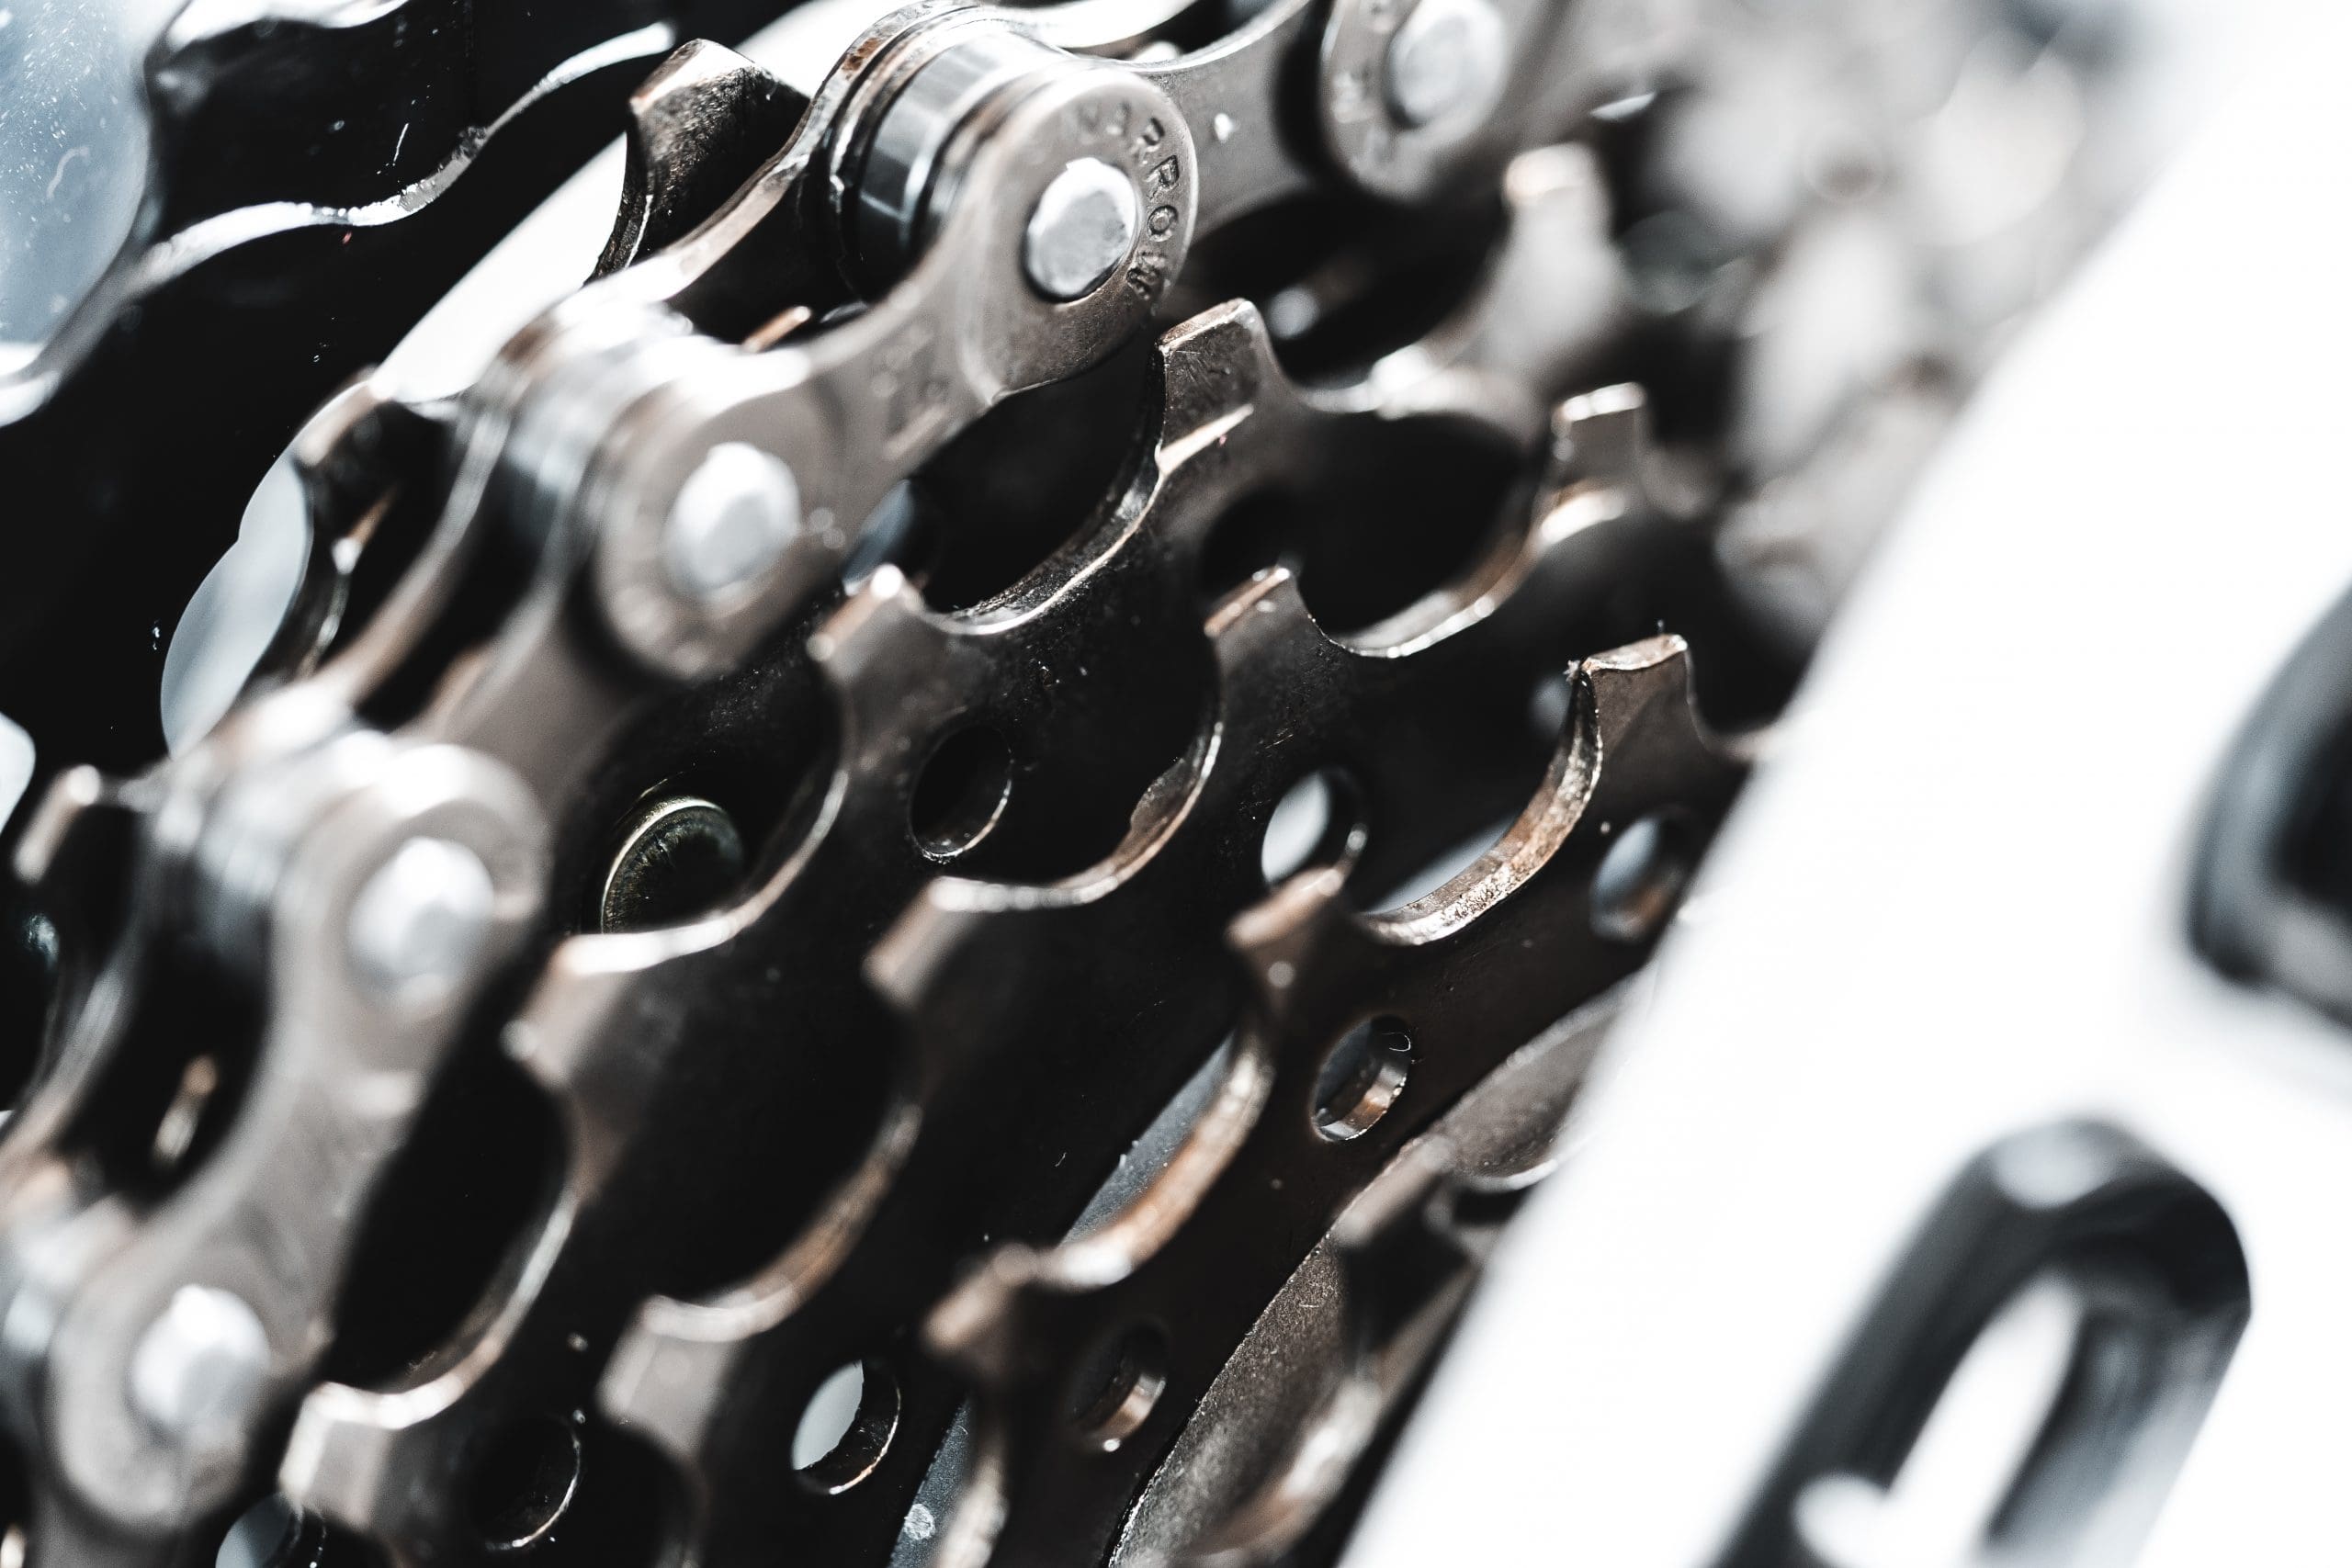 Close up of a bicycle gear sprocket engaged with a chain.